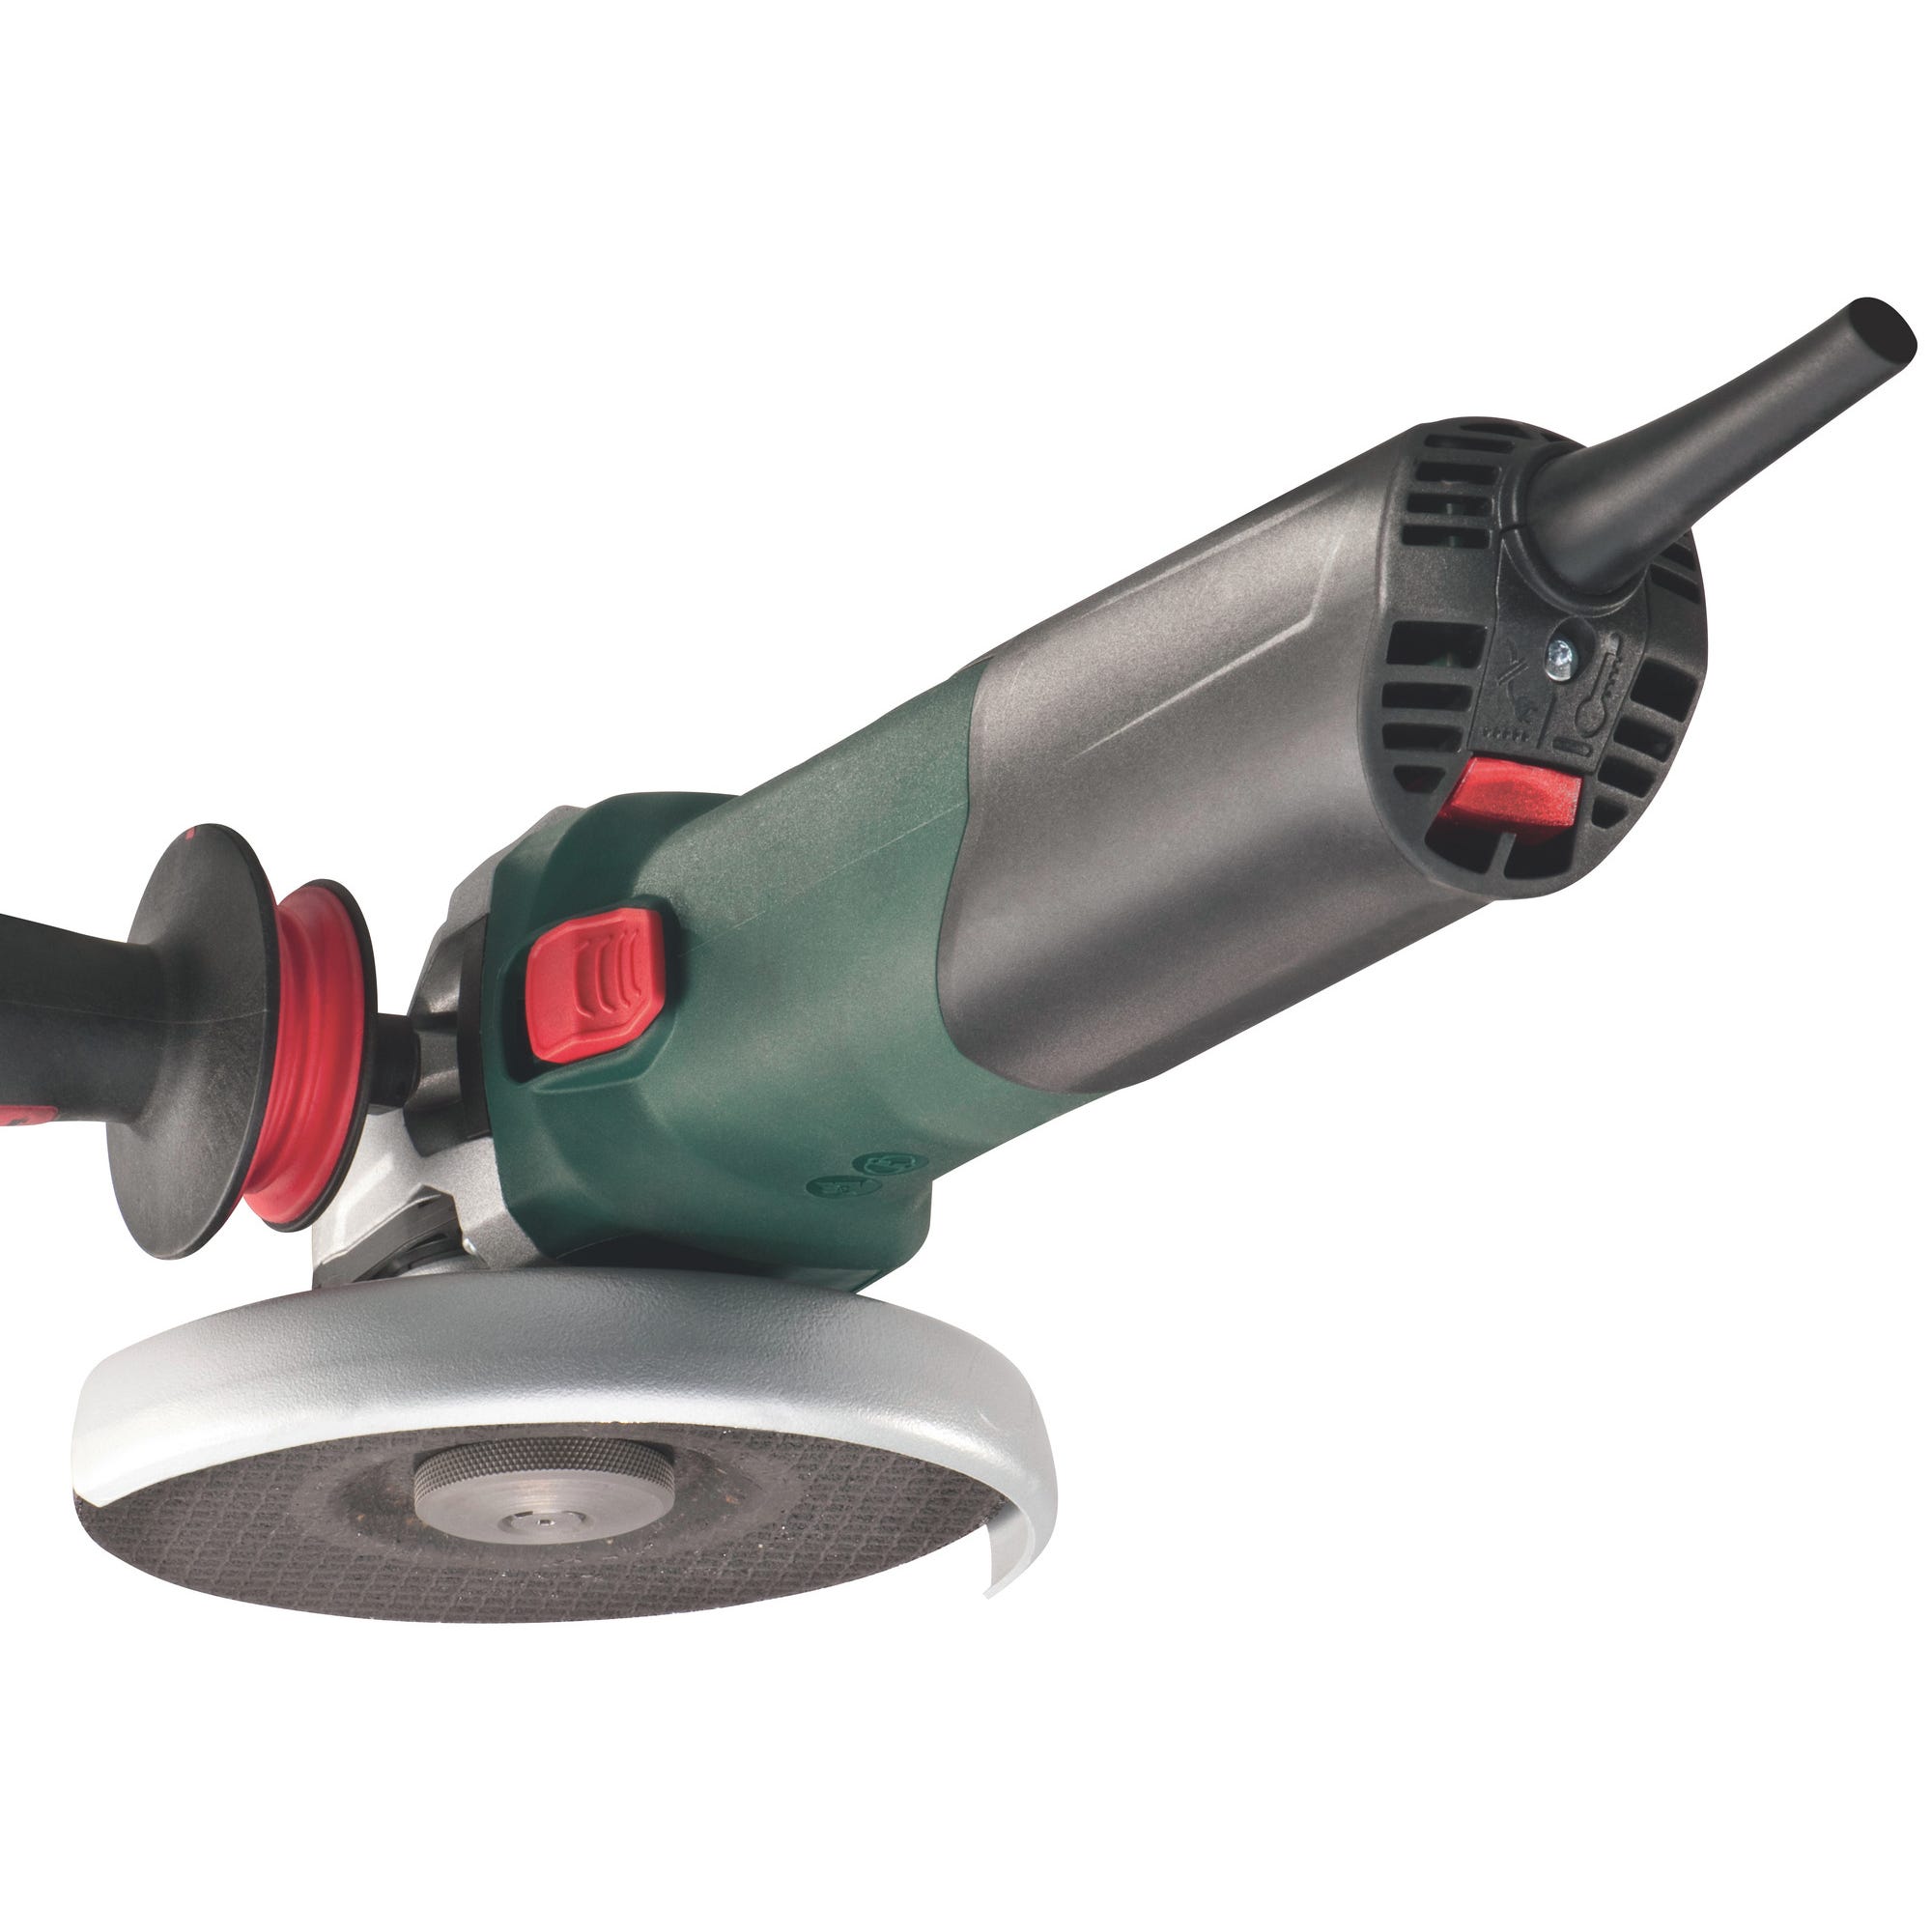 Meuleuse d'angle filaire 1500 W Diam.125 mm WE 15-125 Quick - METABO - 600448000  2